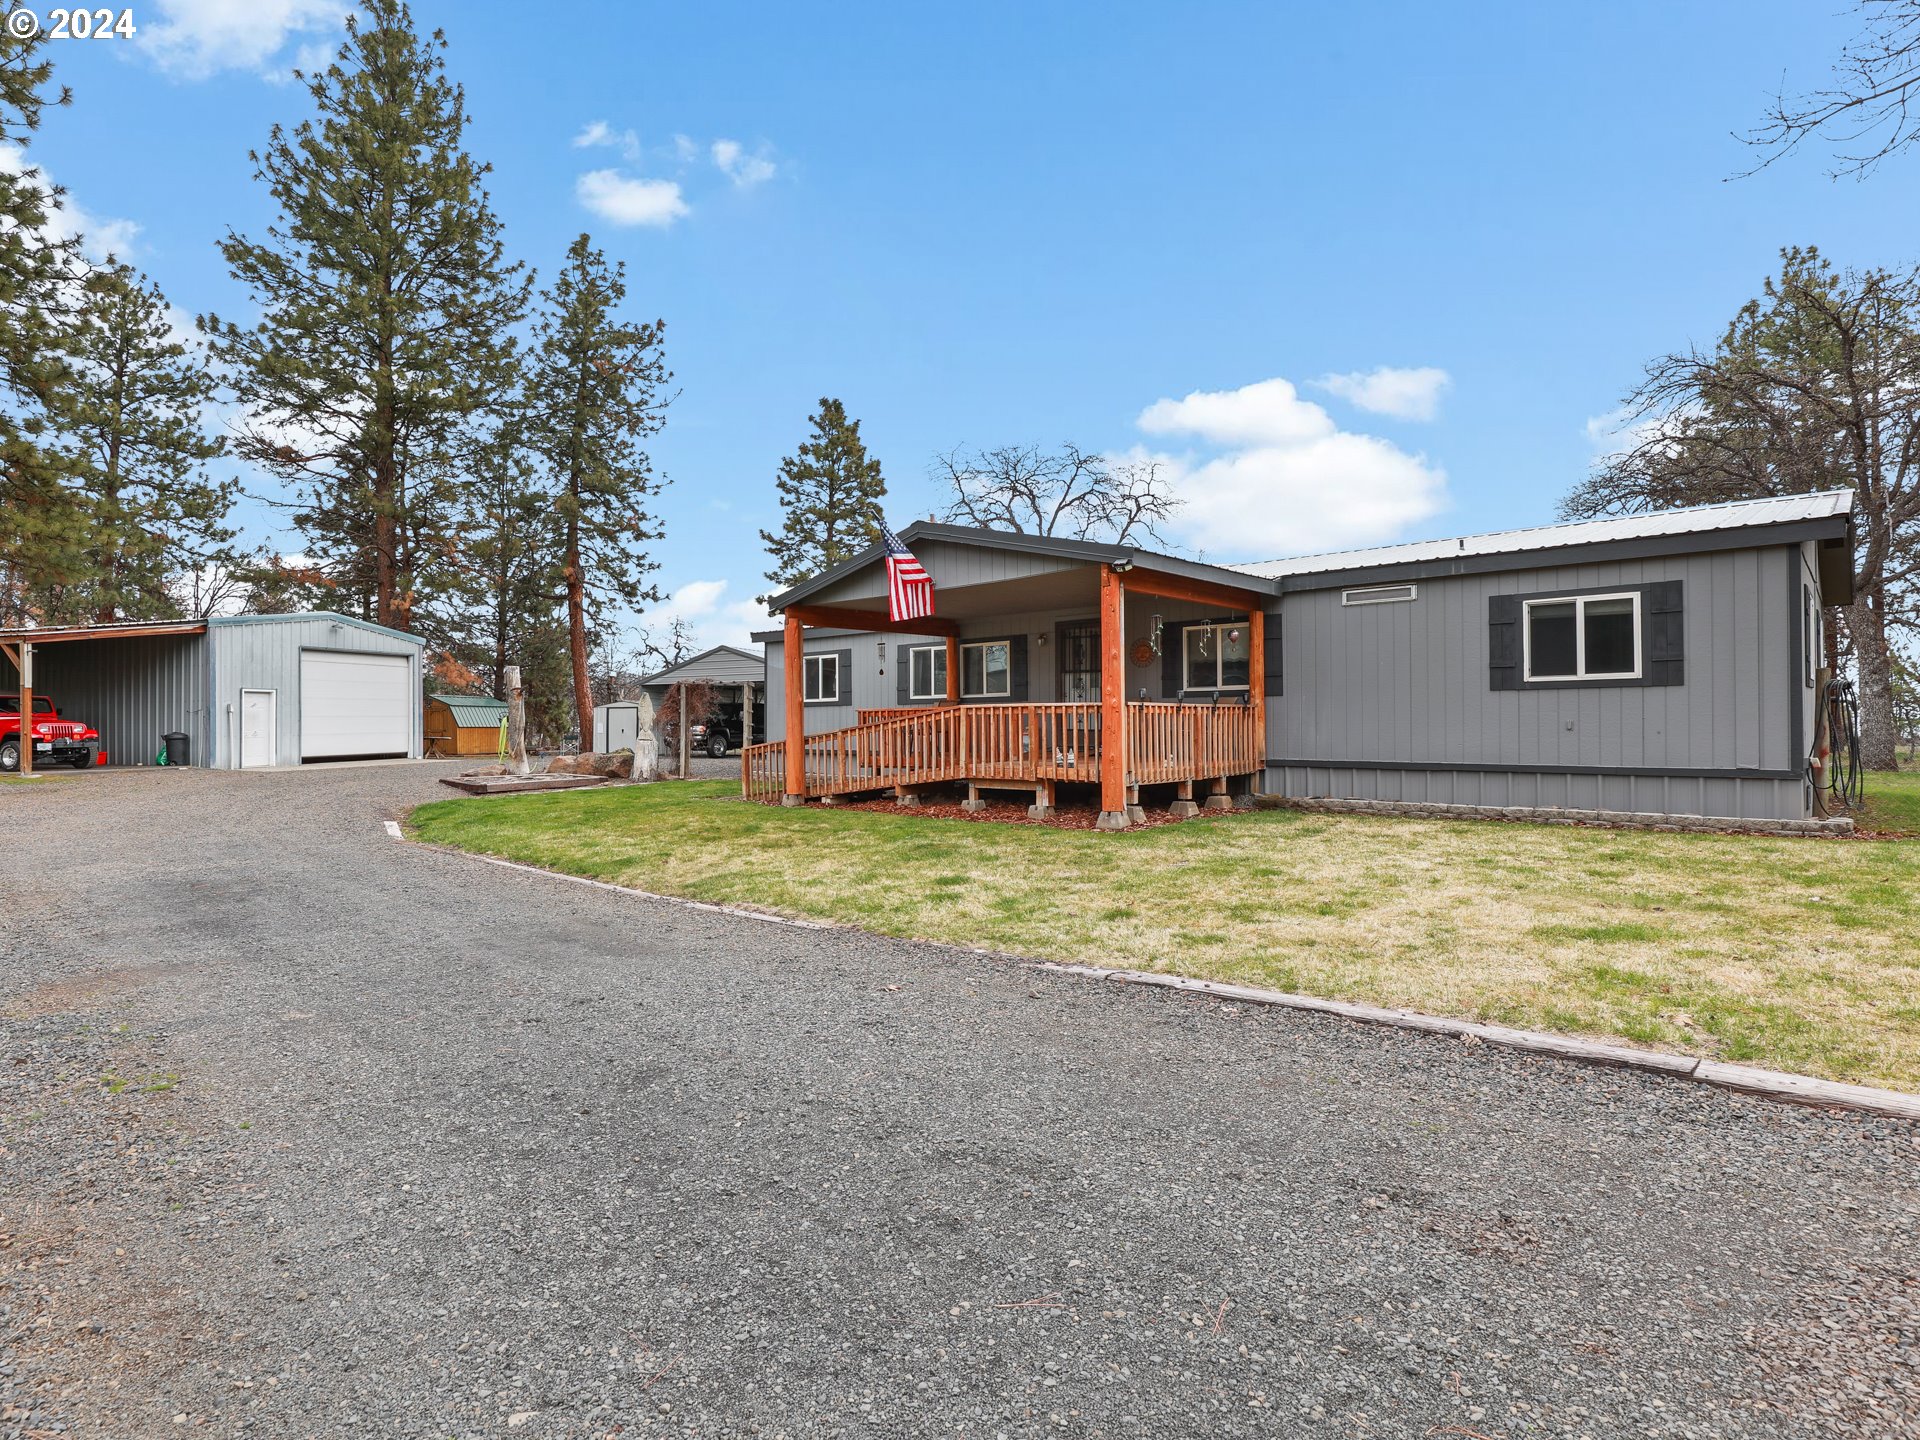 21 N FRONTAGE RD, Tygh Valley, OR 97063